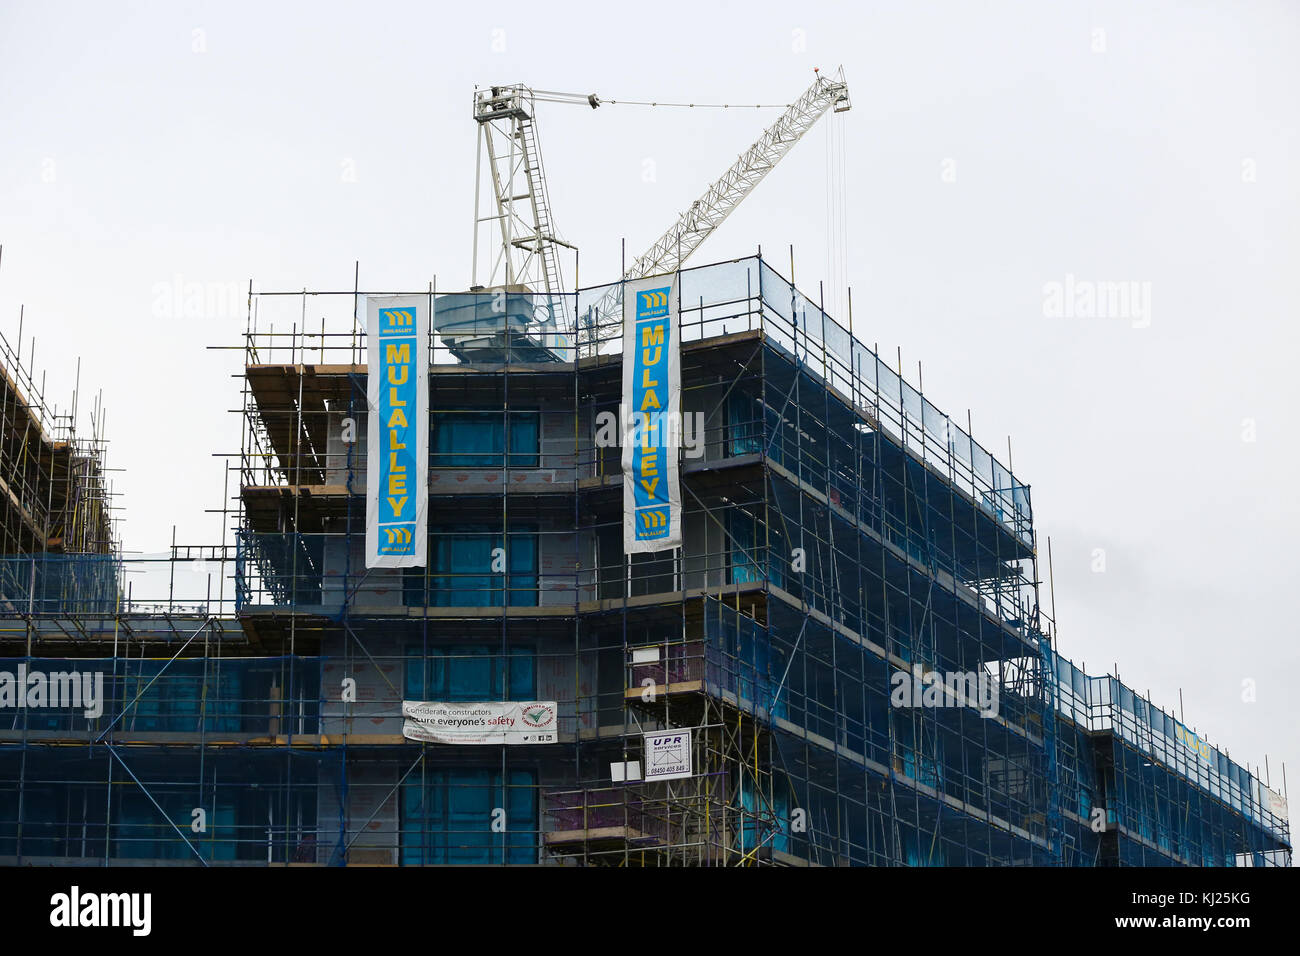 North London. UK 21 Nov 2017 - A new housing estate, with properties available to purchase in North London property as Britain's Chancellor of the Exchequer Philip Hammond is expected to announce plans to build 300,000 homes every year, in his autumn budget on Wednesday, 22 November 2017. It has been reported in the Sunday Times newspaper that Philip Hammond will do 'whatever it takes' to meet this target. Stock Photo